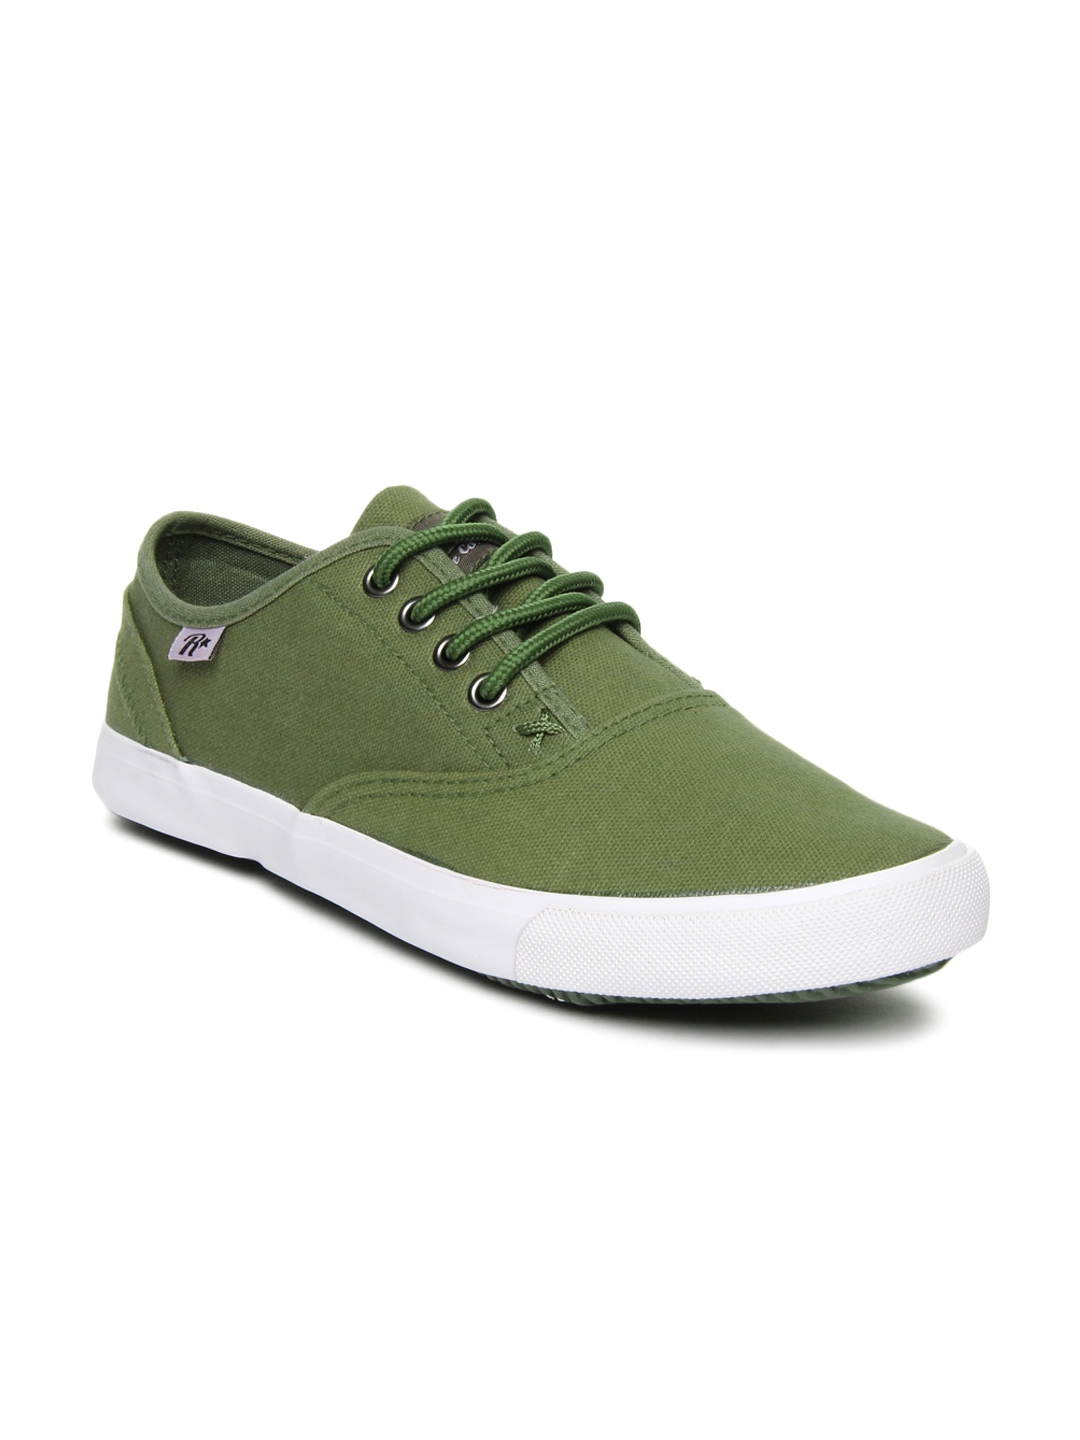 Buy Roadster Men Green Canvas Shoes - Casual Shoes for Men 657952 | Myntra